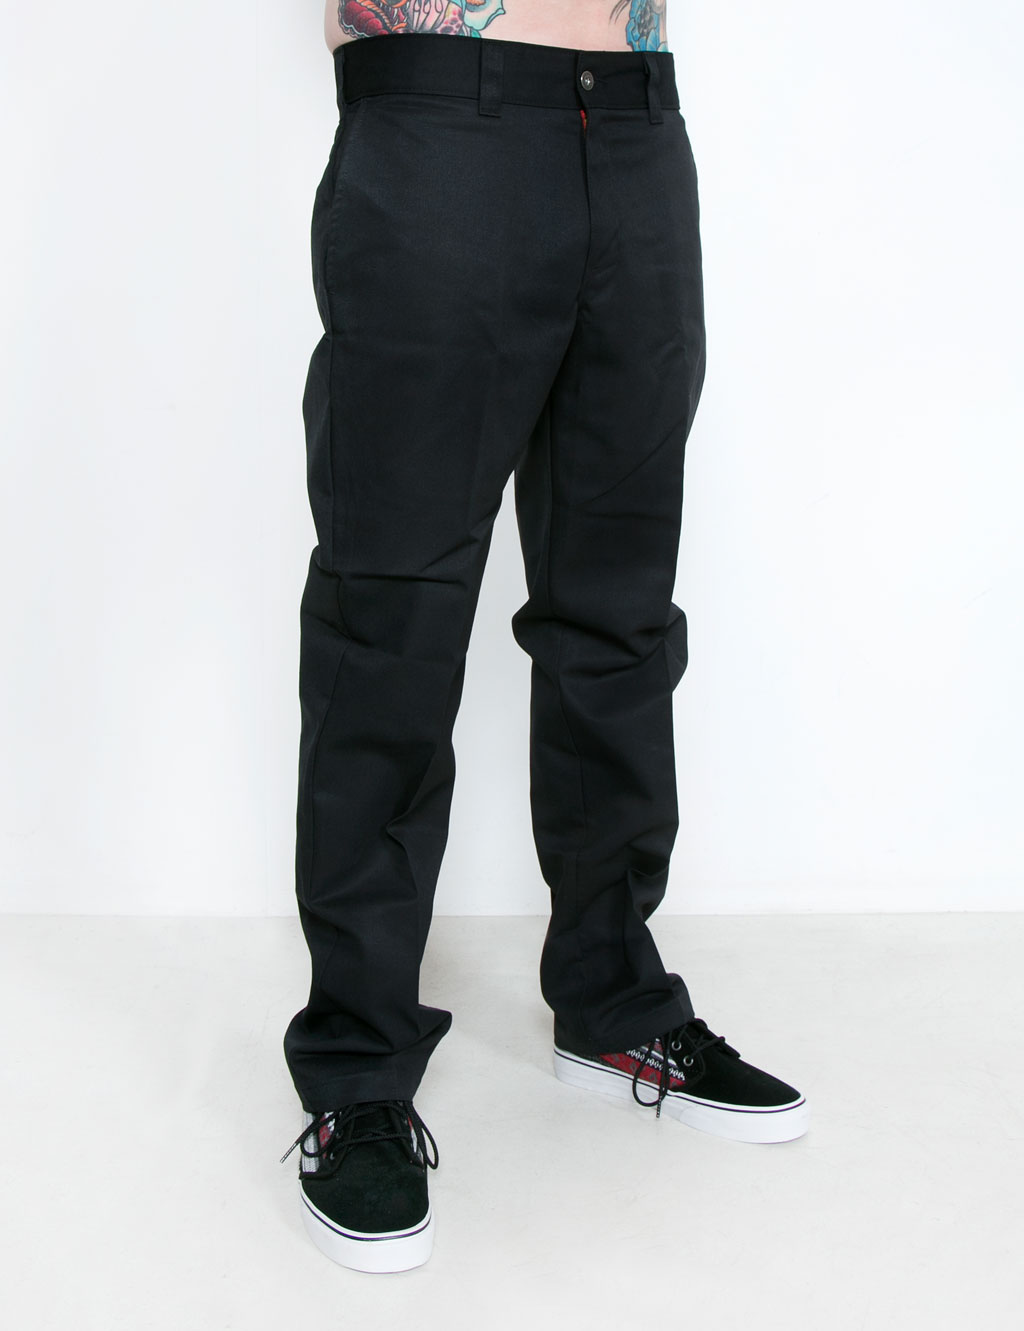 dickies-67-collection-work-pant-black-1